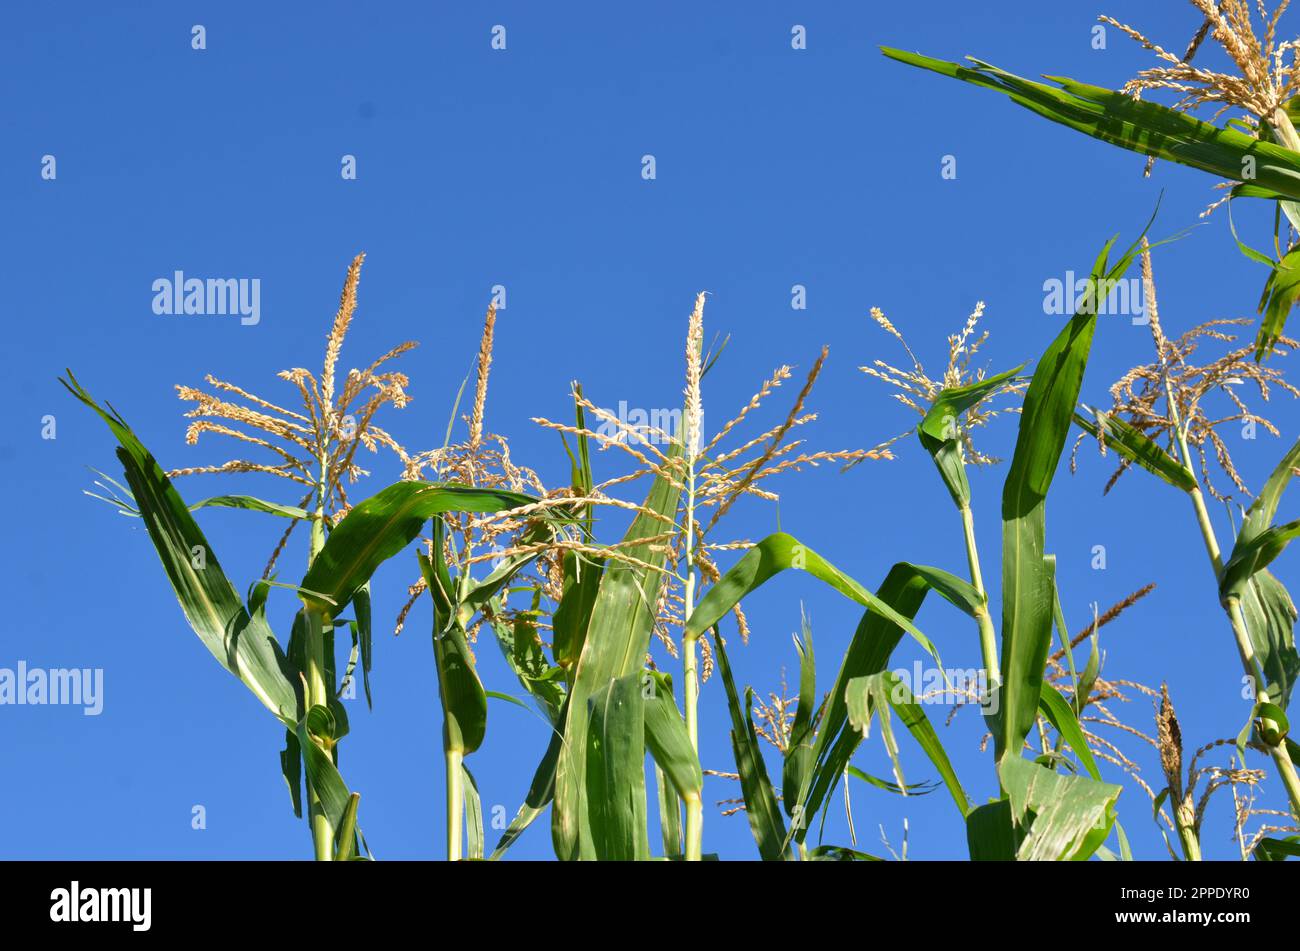 Corn Plant Tassels With Blue Sky Background. Stock Photo